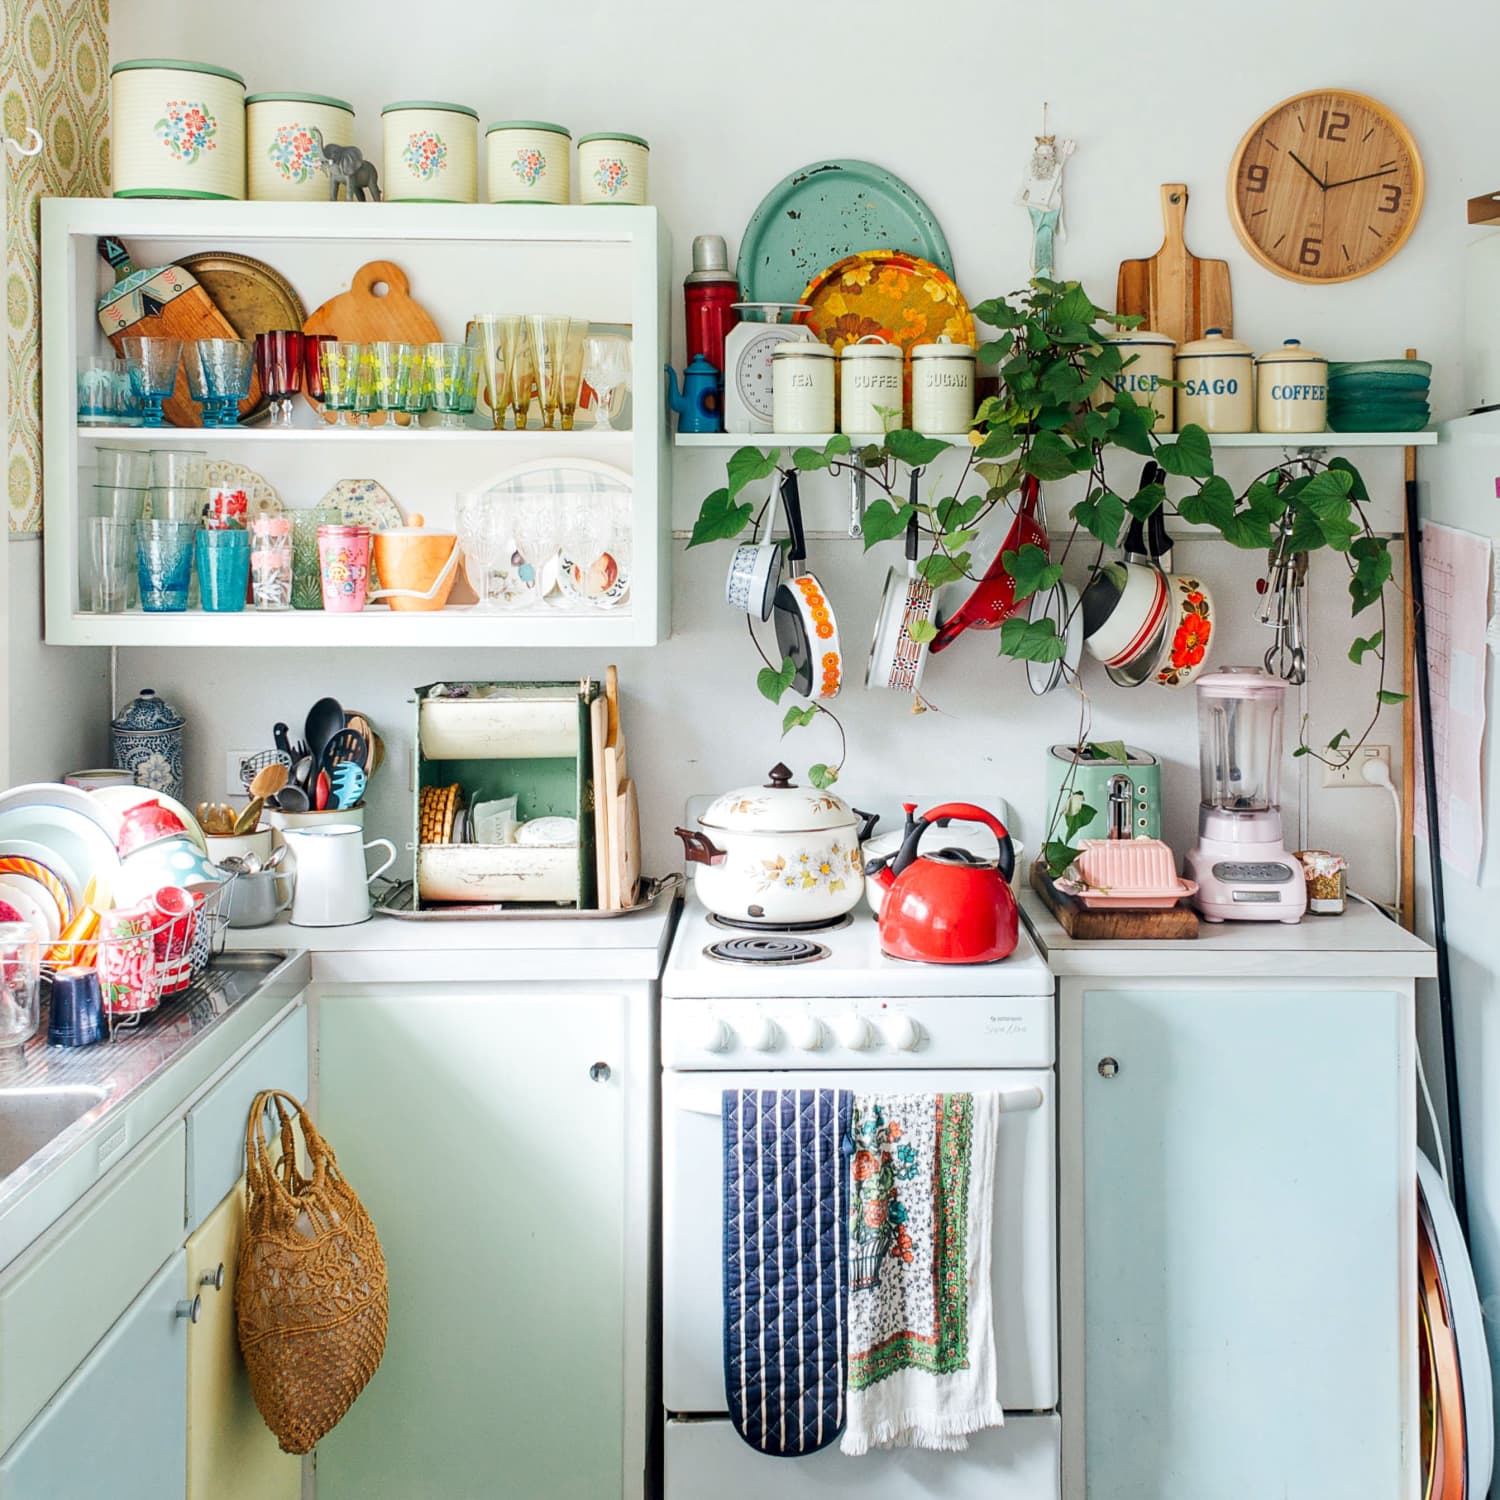 Declutter Your Kitchen With These 5 Great Organization Hacks